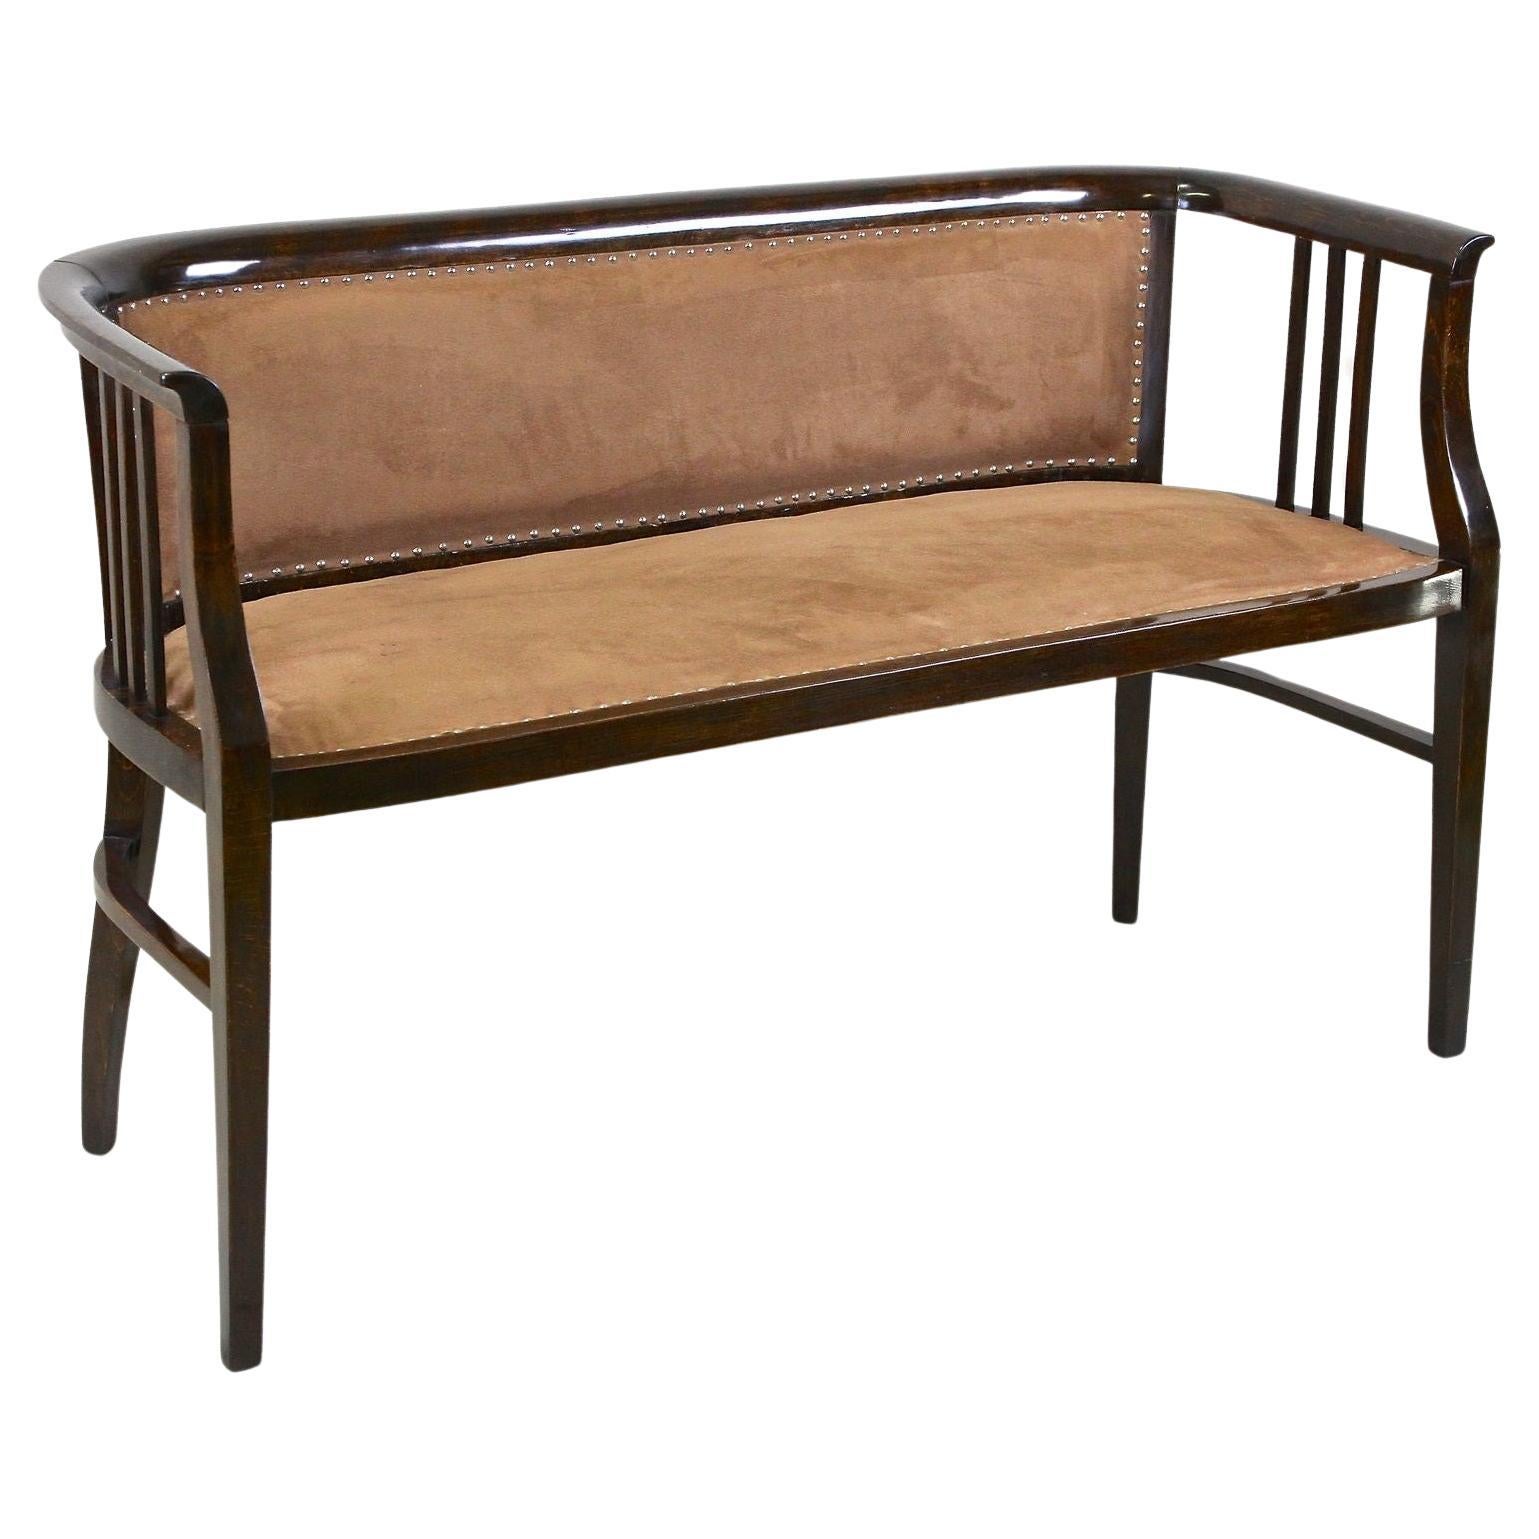 20th Century Art Nouveau Bentwood Bench, Newly Upholstered, Austria, circa 1910 For Sale